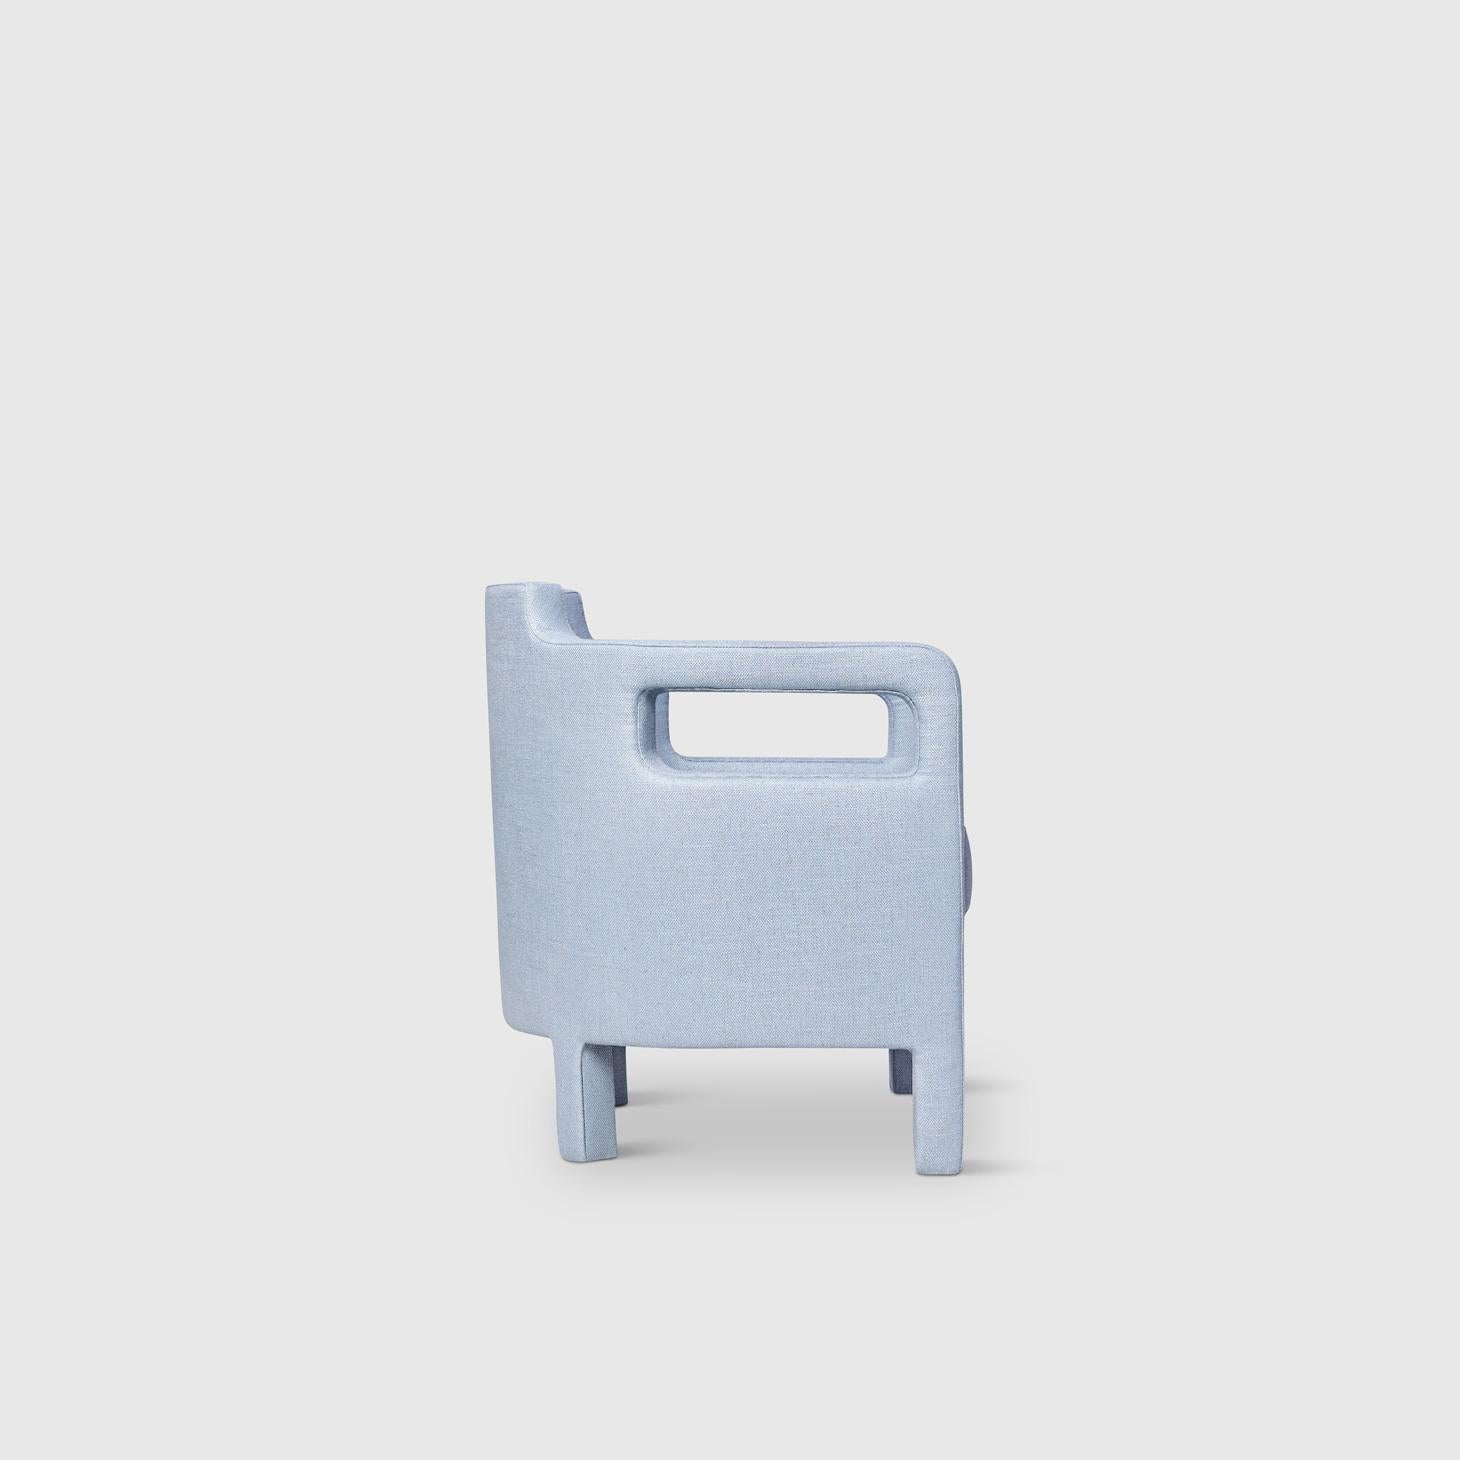 This Jinbao street lounge chair by Yabu Pushelberg is presented in an ice blue Winchester Street Cielo linen blend fabric from the Man of Parts collection.

The unique profile of the fully upholstered Jinbao Street lounge chair by Yabu Pushelberg